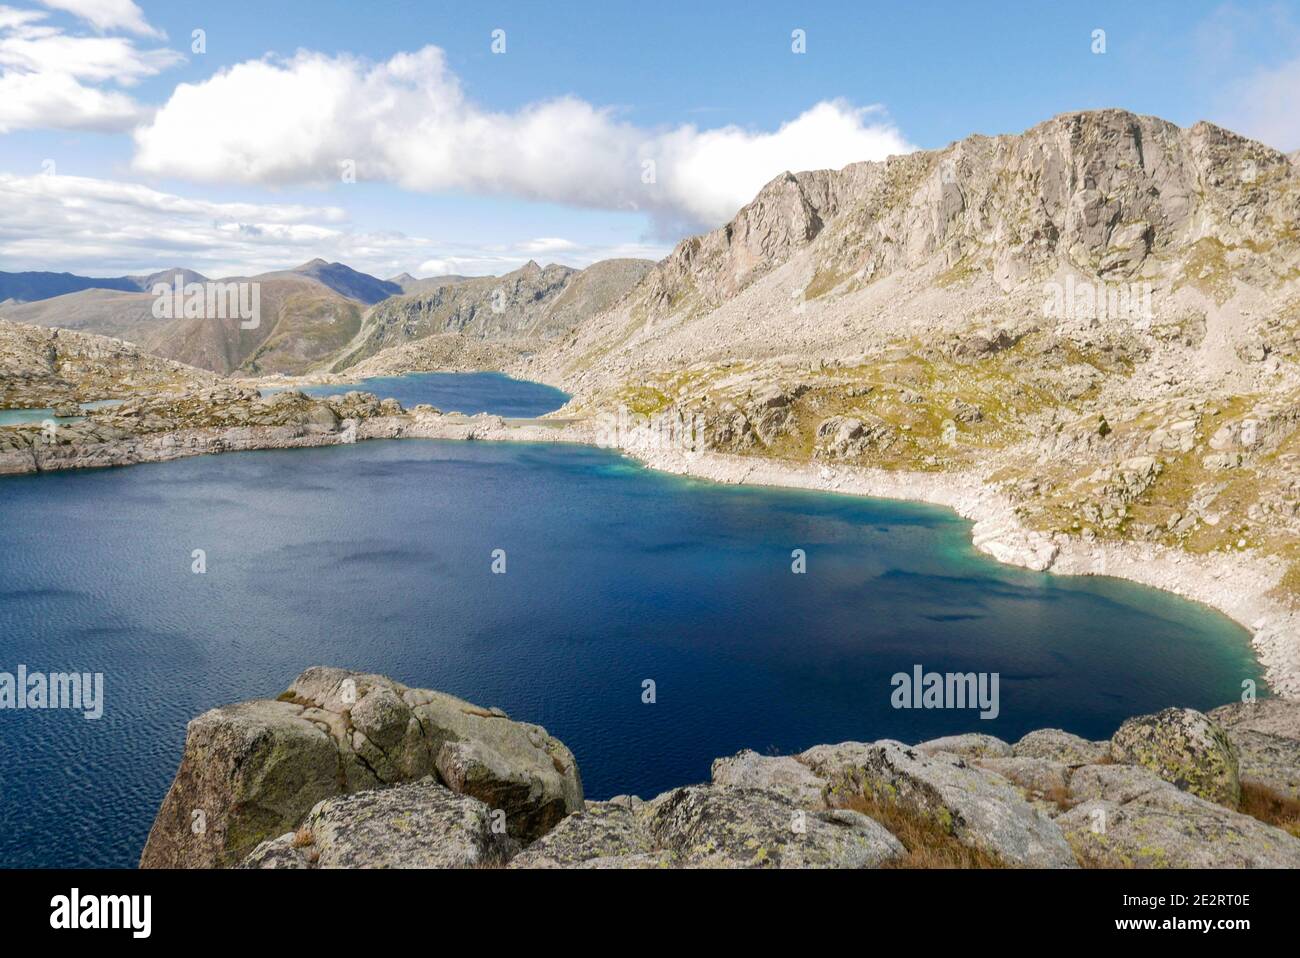 Spain, Catalonia: Vall Fosca. Aoguestortes y Sant Maurici National Park. Overview of the Estany de Mar located at an altitude of 2450m, in the lake ar Stock Photo